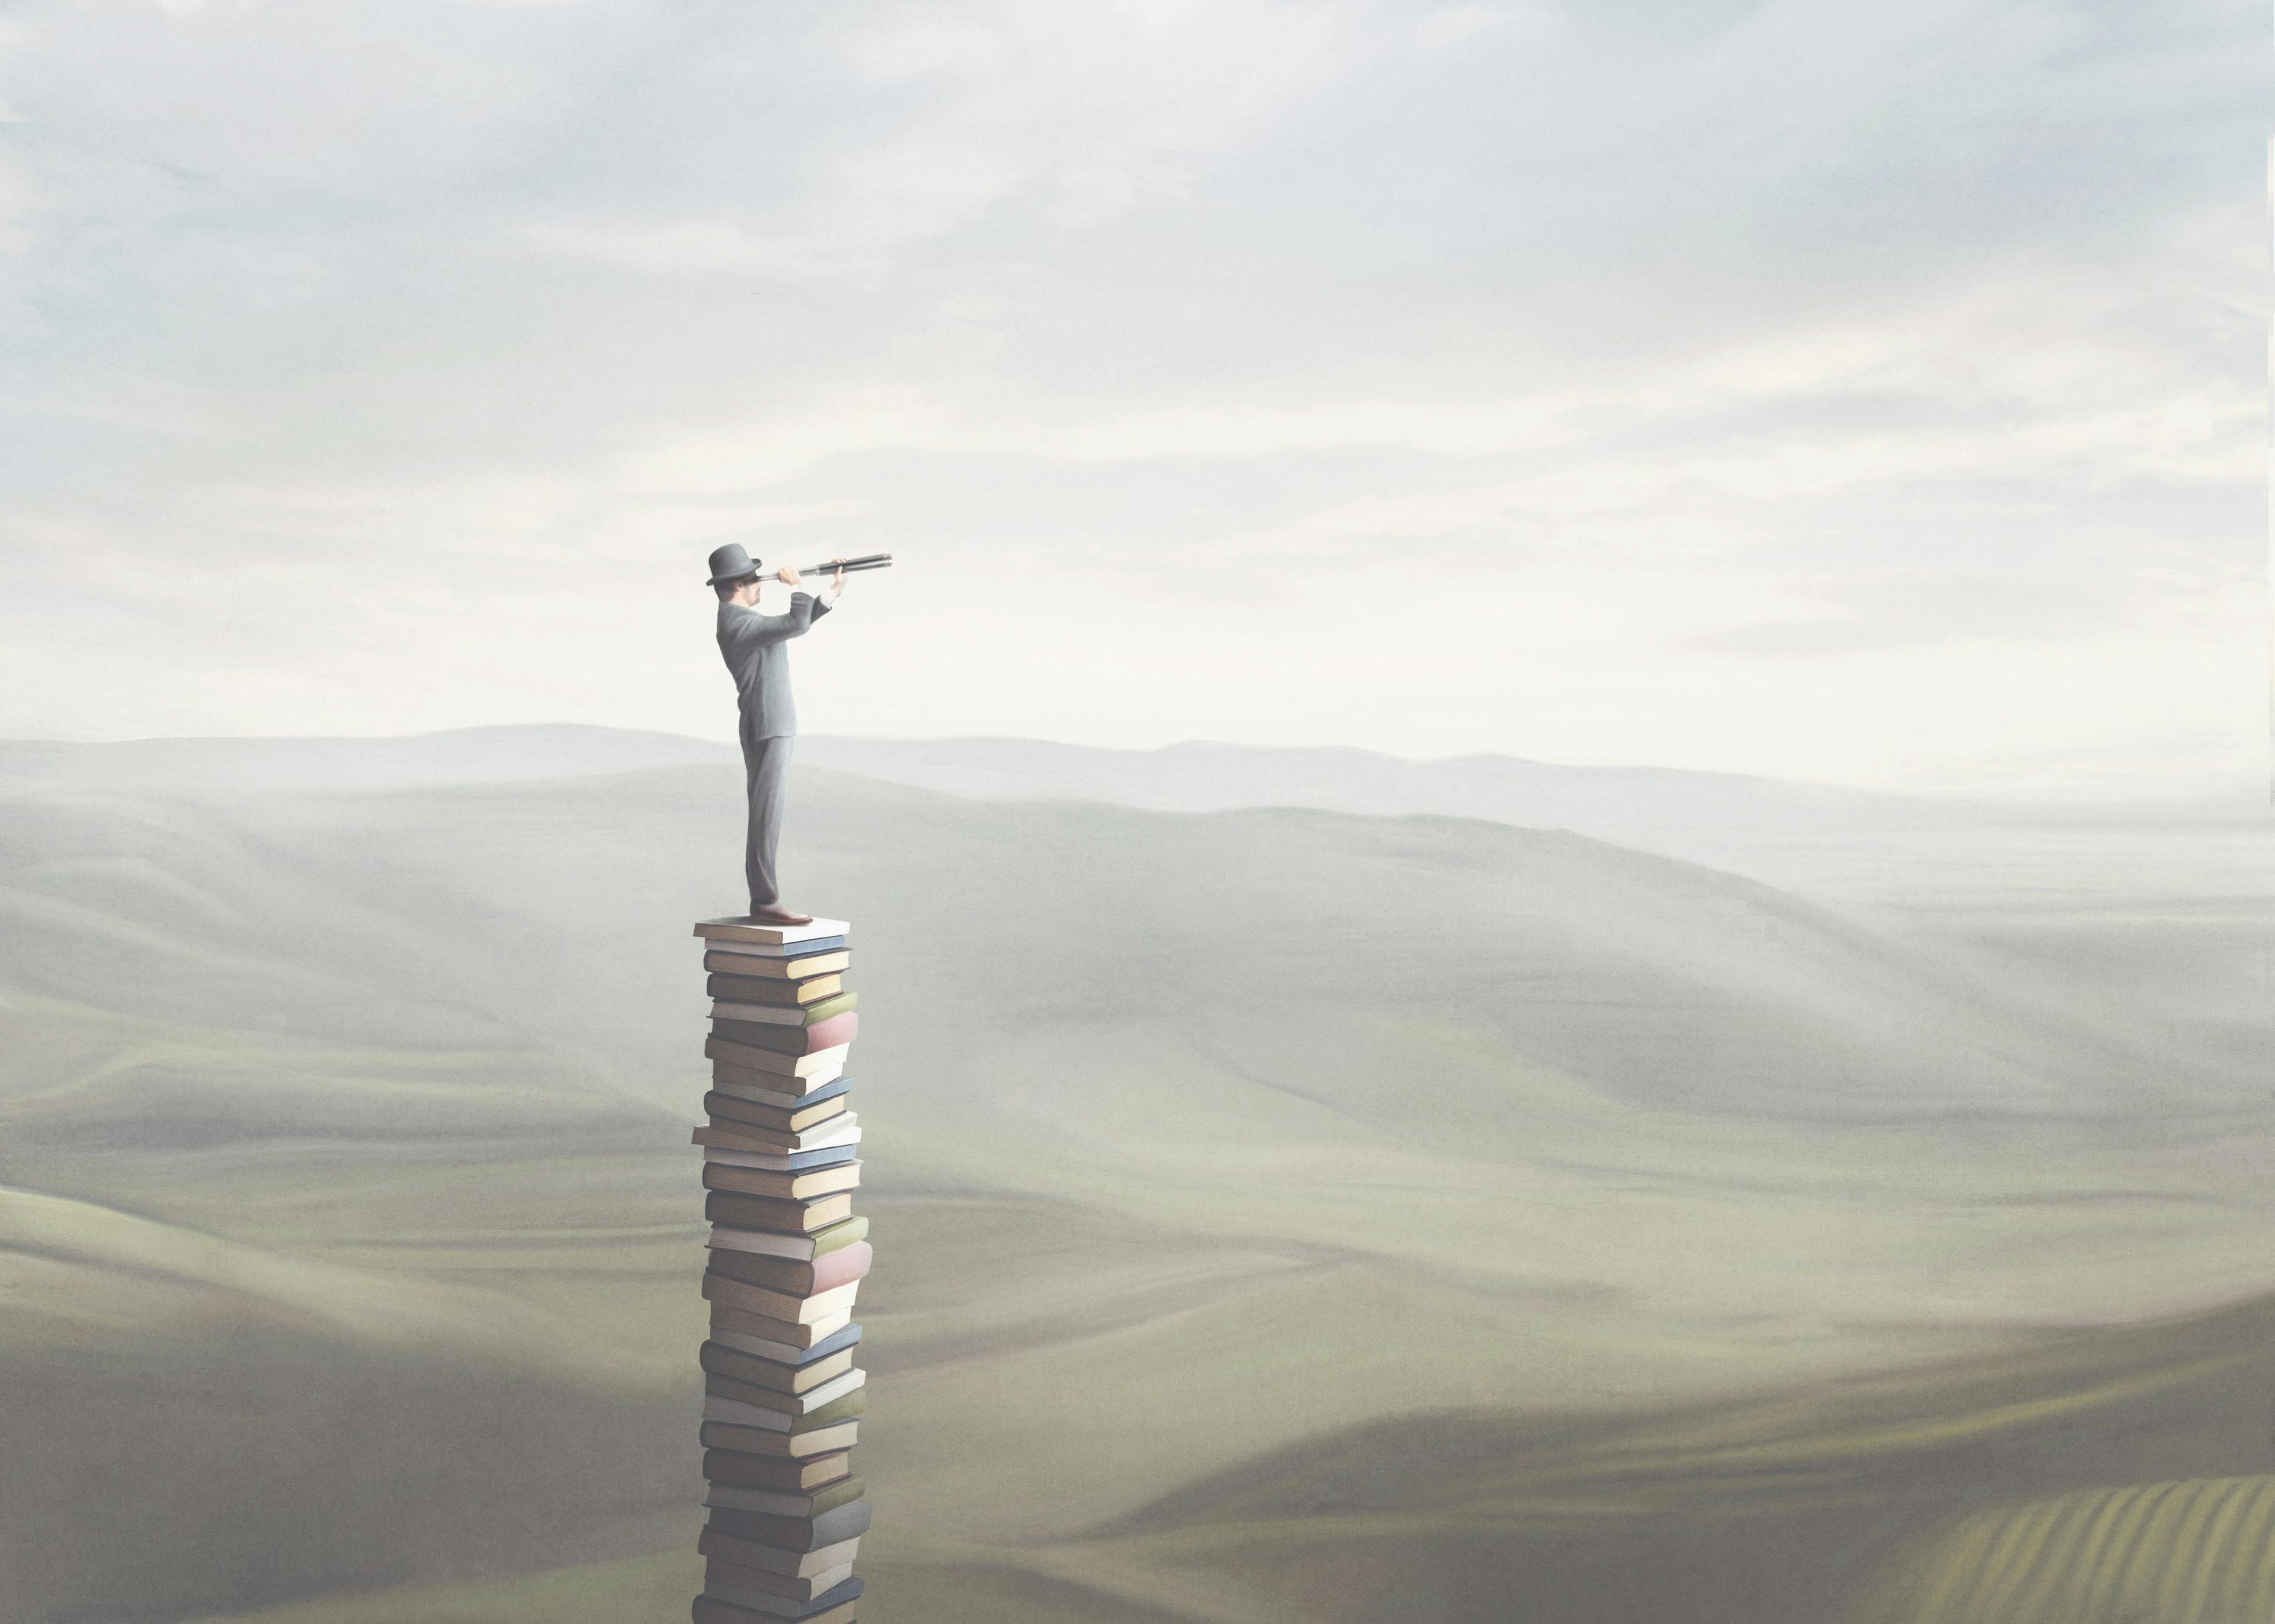 man standing on books looking out at the view – visual representation of overcoming ignorance